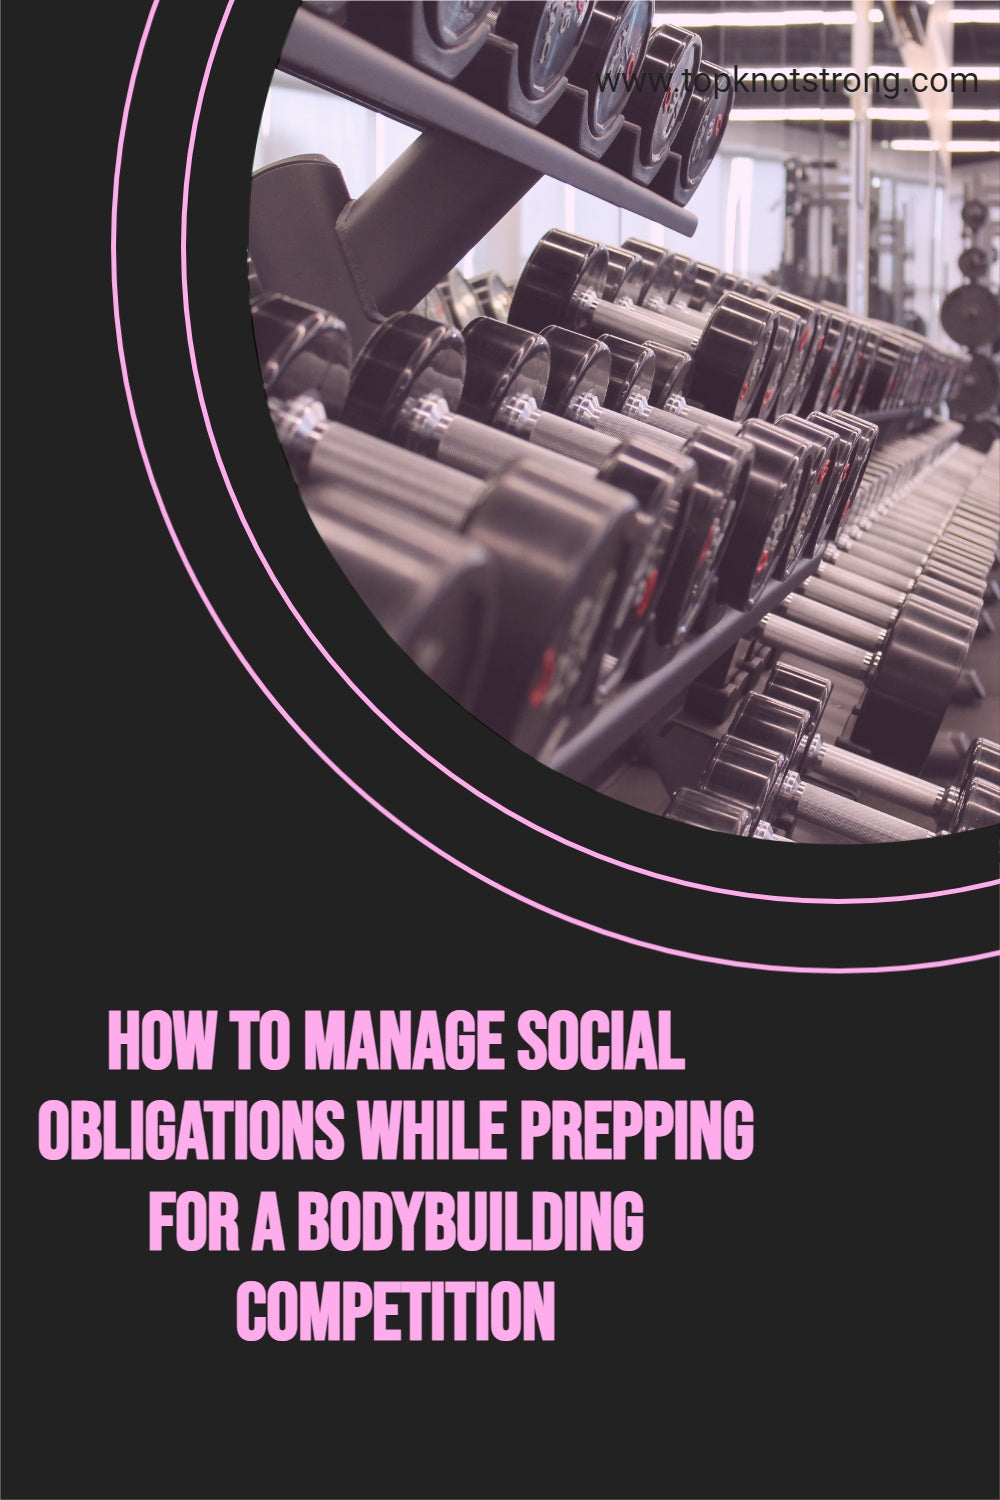 How to Manage Social Obligations While Prepping for a Bodybuilding Competition